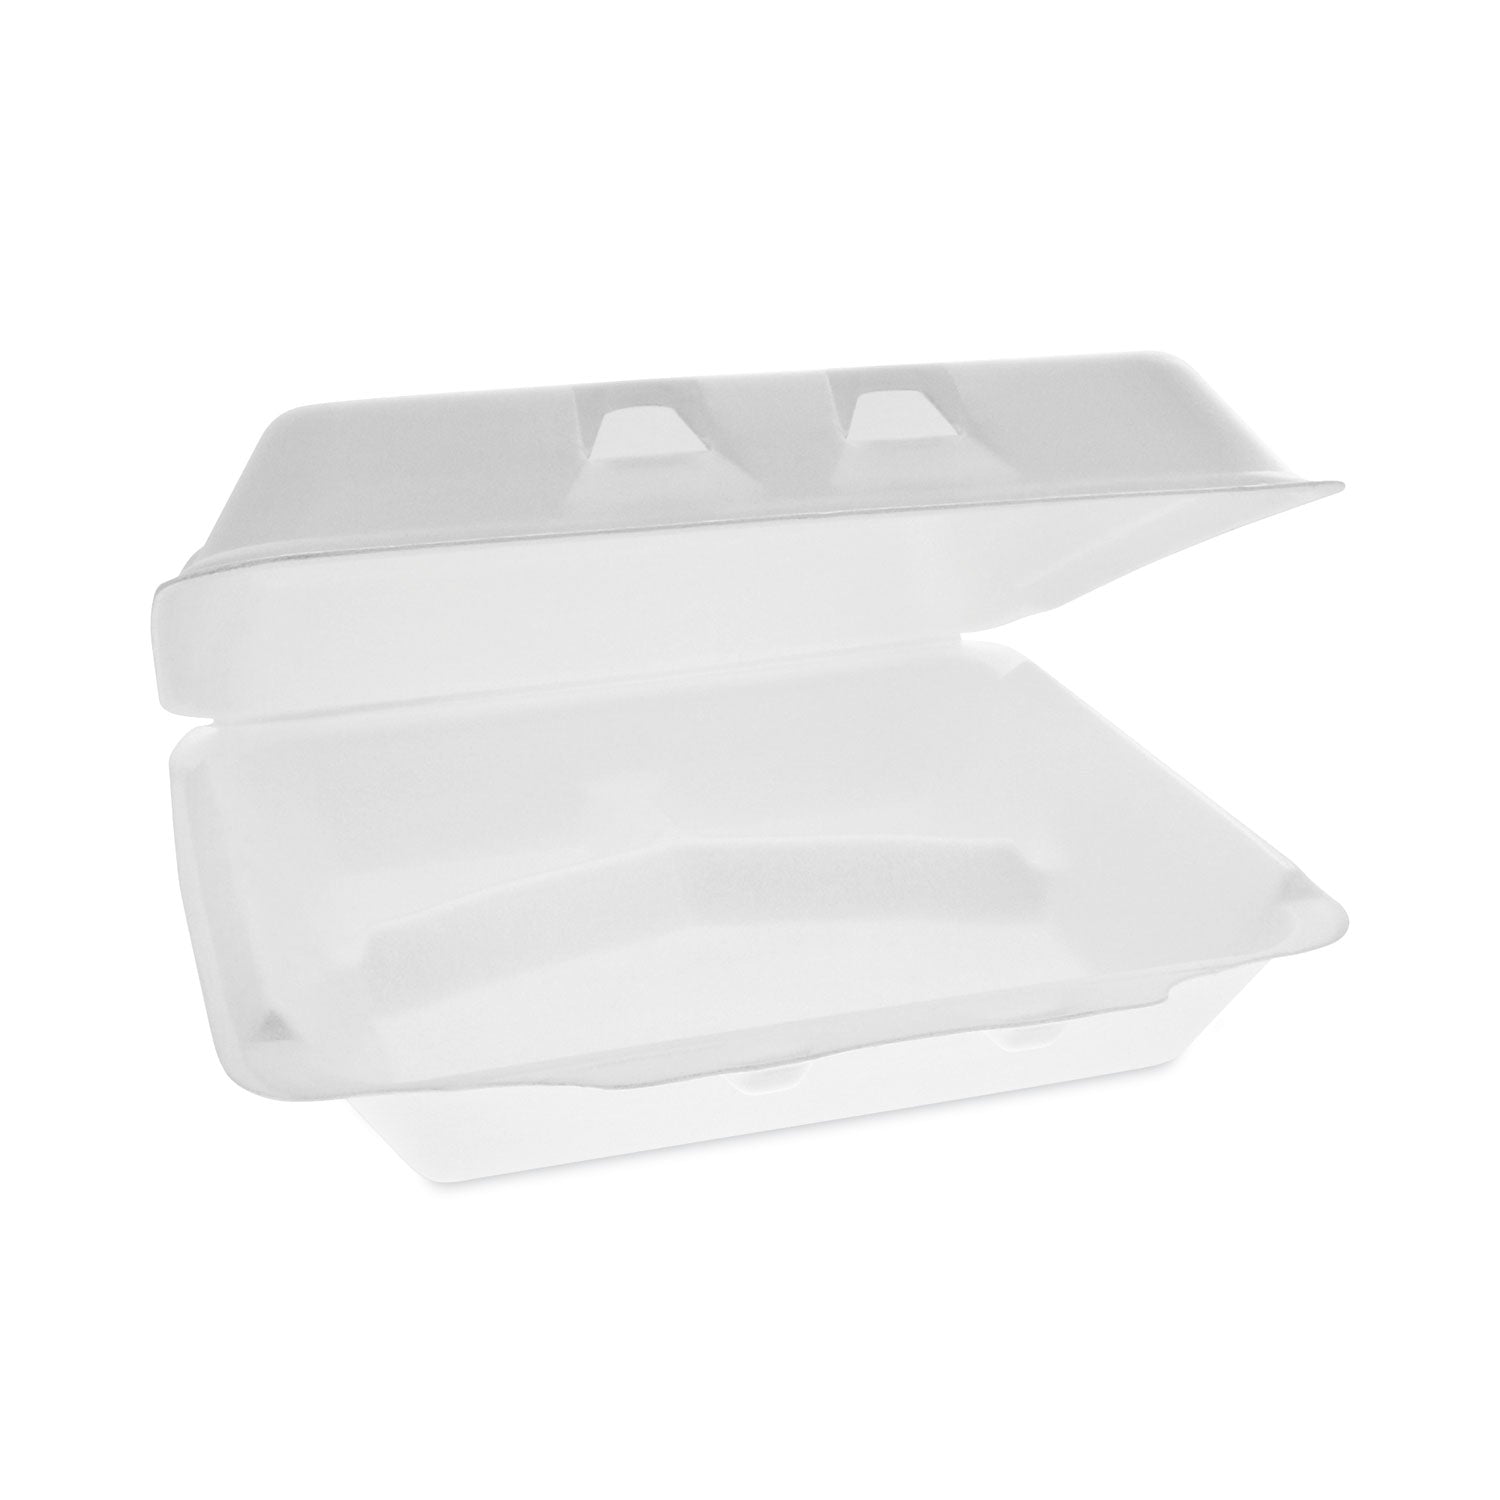 smartlock-foam-hinged-lid-container-x-large-3-compartment-95-x-105-x-325-white-250-carton_pctyhlw10030000 - 1